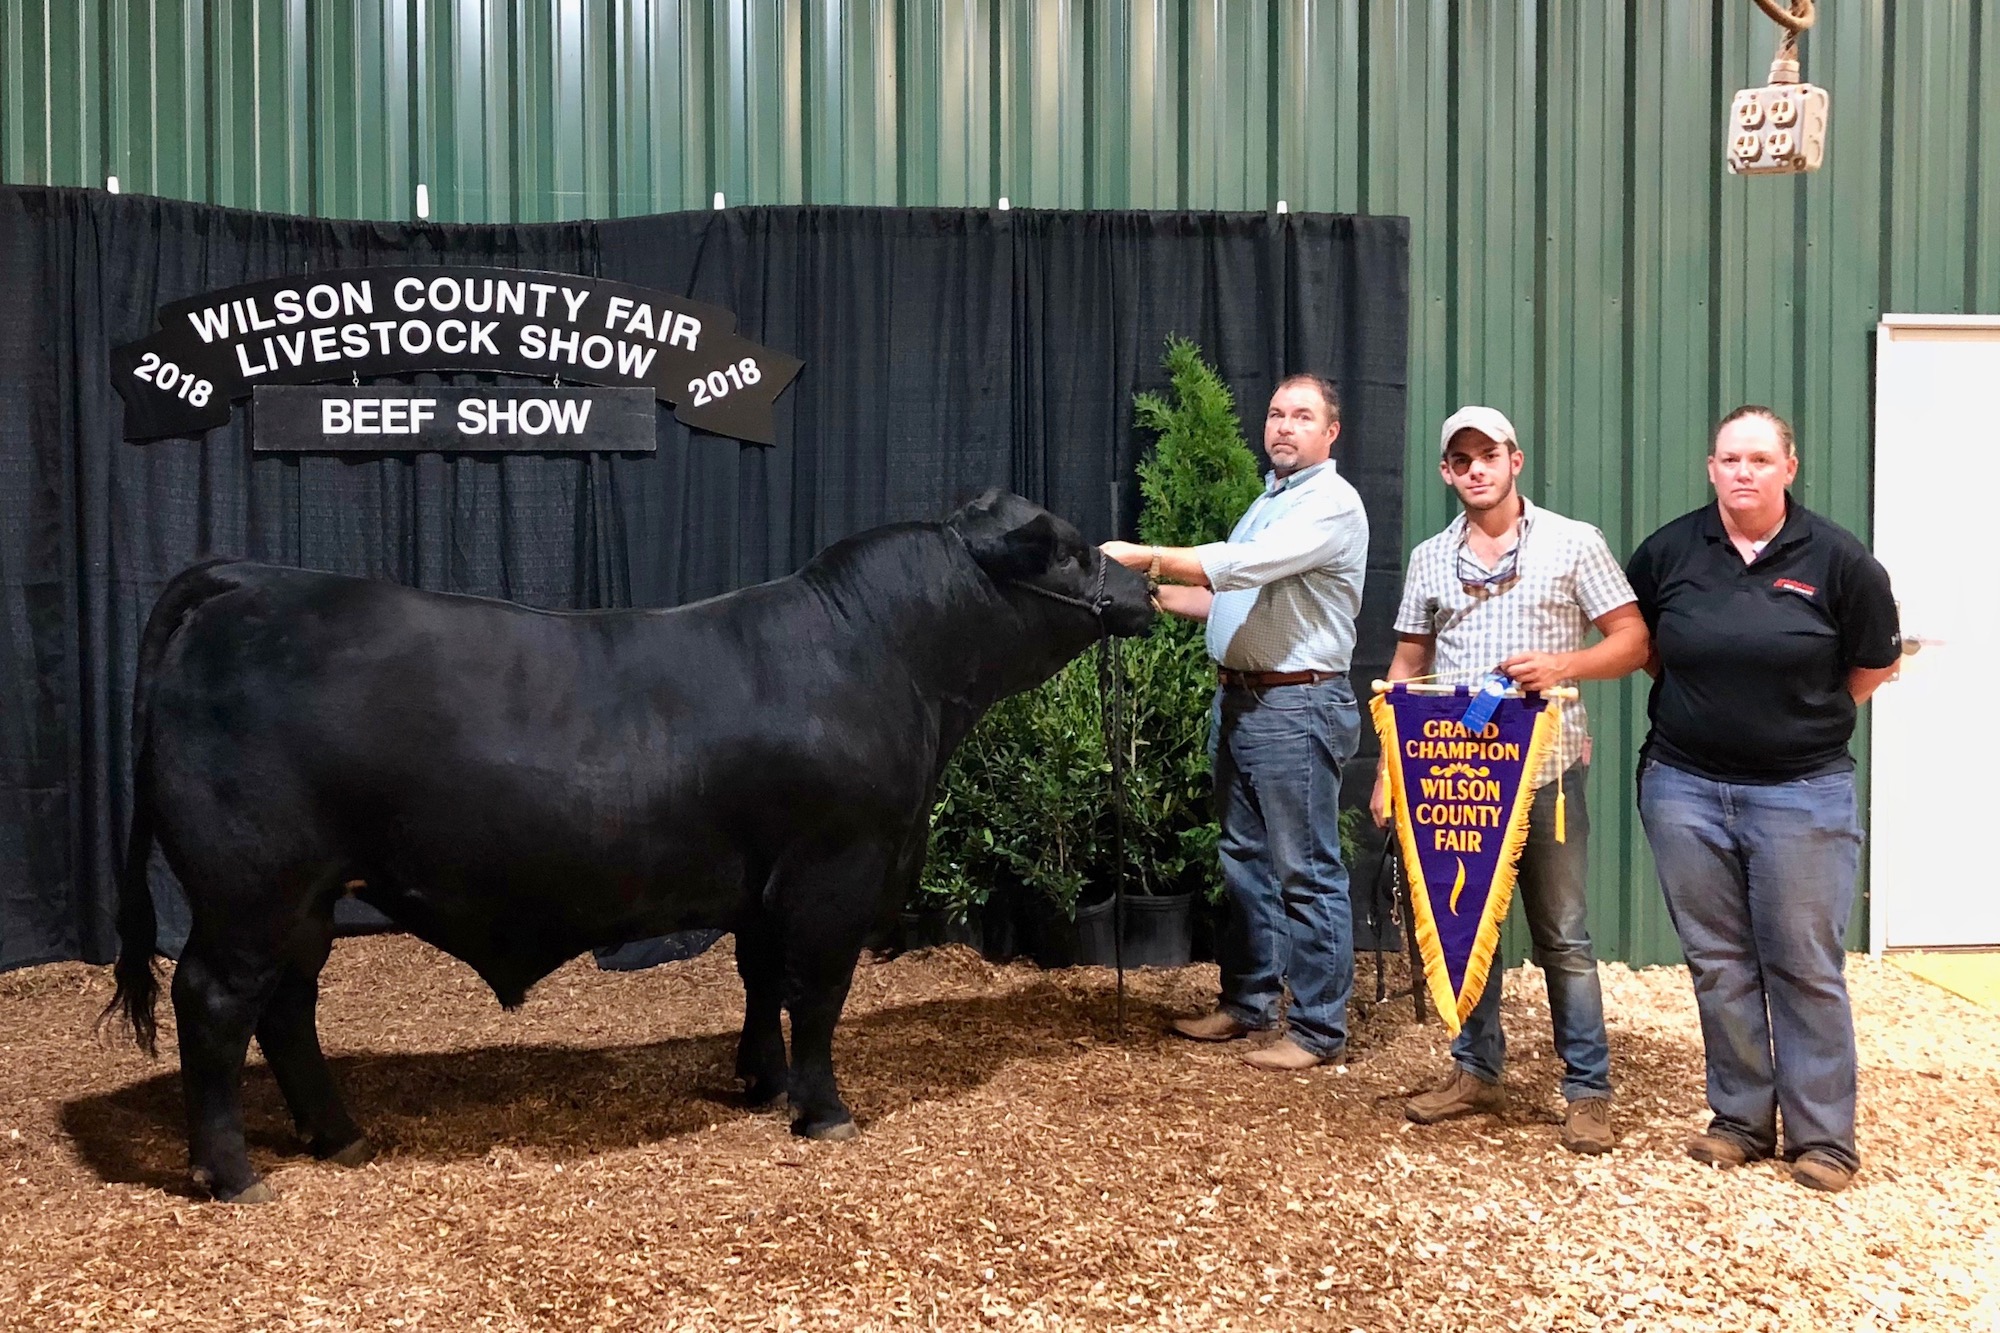 No matter the name, or his puppy dog nature, Austin Peay's champion bull charged through first place and champion designations at beef shows this summer, which culminated with his winning division grand champion at the Tennessee State Fair. Frank also won overall grand champion bull at the Wilson County Fair, the state’s largest fair.